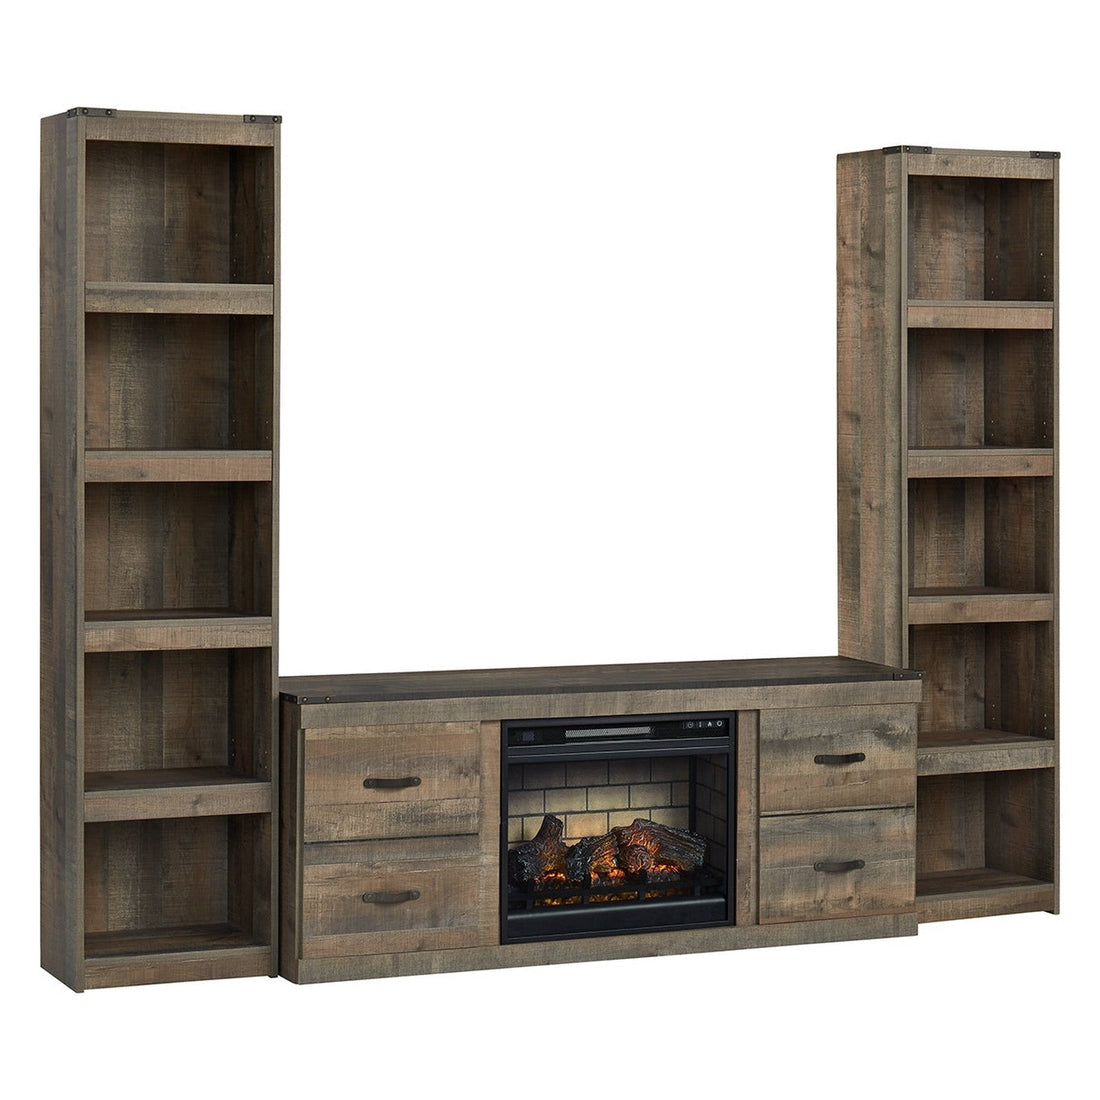 Trinell Entertainment Center with Electric Fireplace Ash-EW0446W5